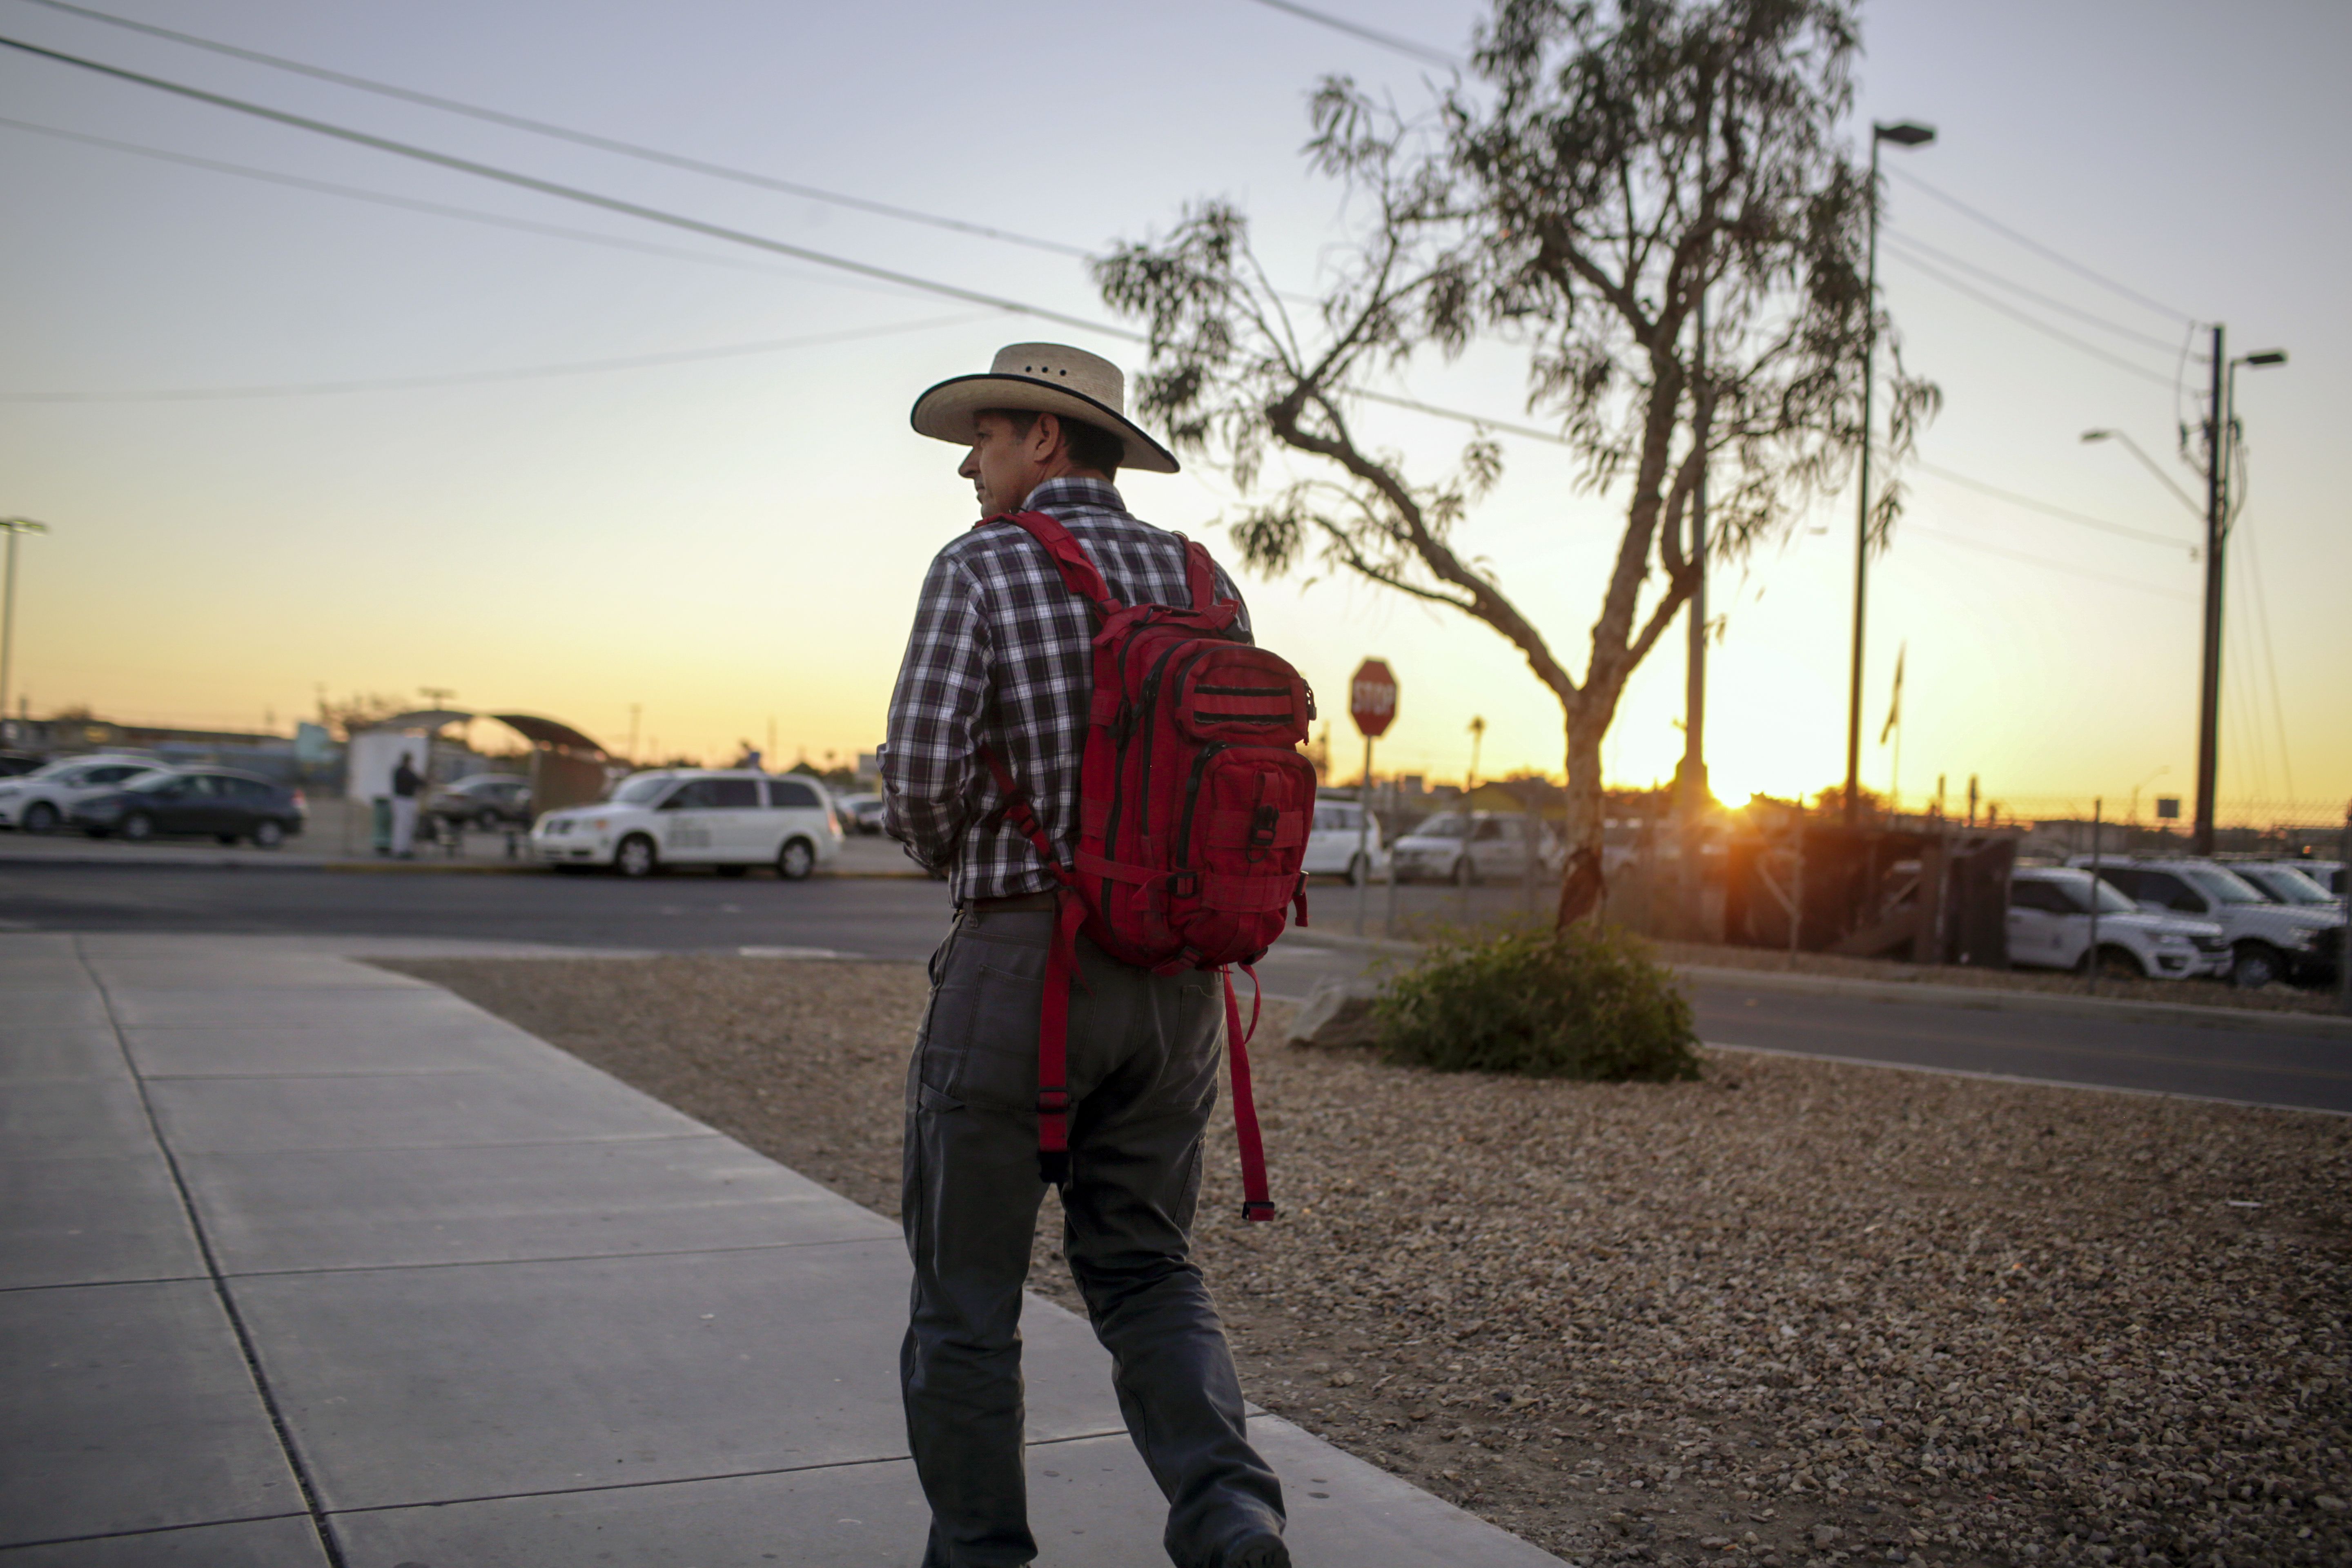 Construction worker Enrique Morales walks to his job after passing through the San Luis port-of-entry in Arizona. Image by Kathleen Flynn. United States, 2019.